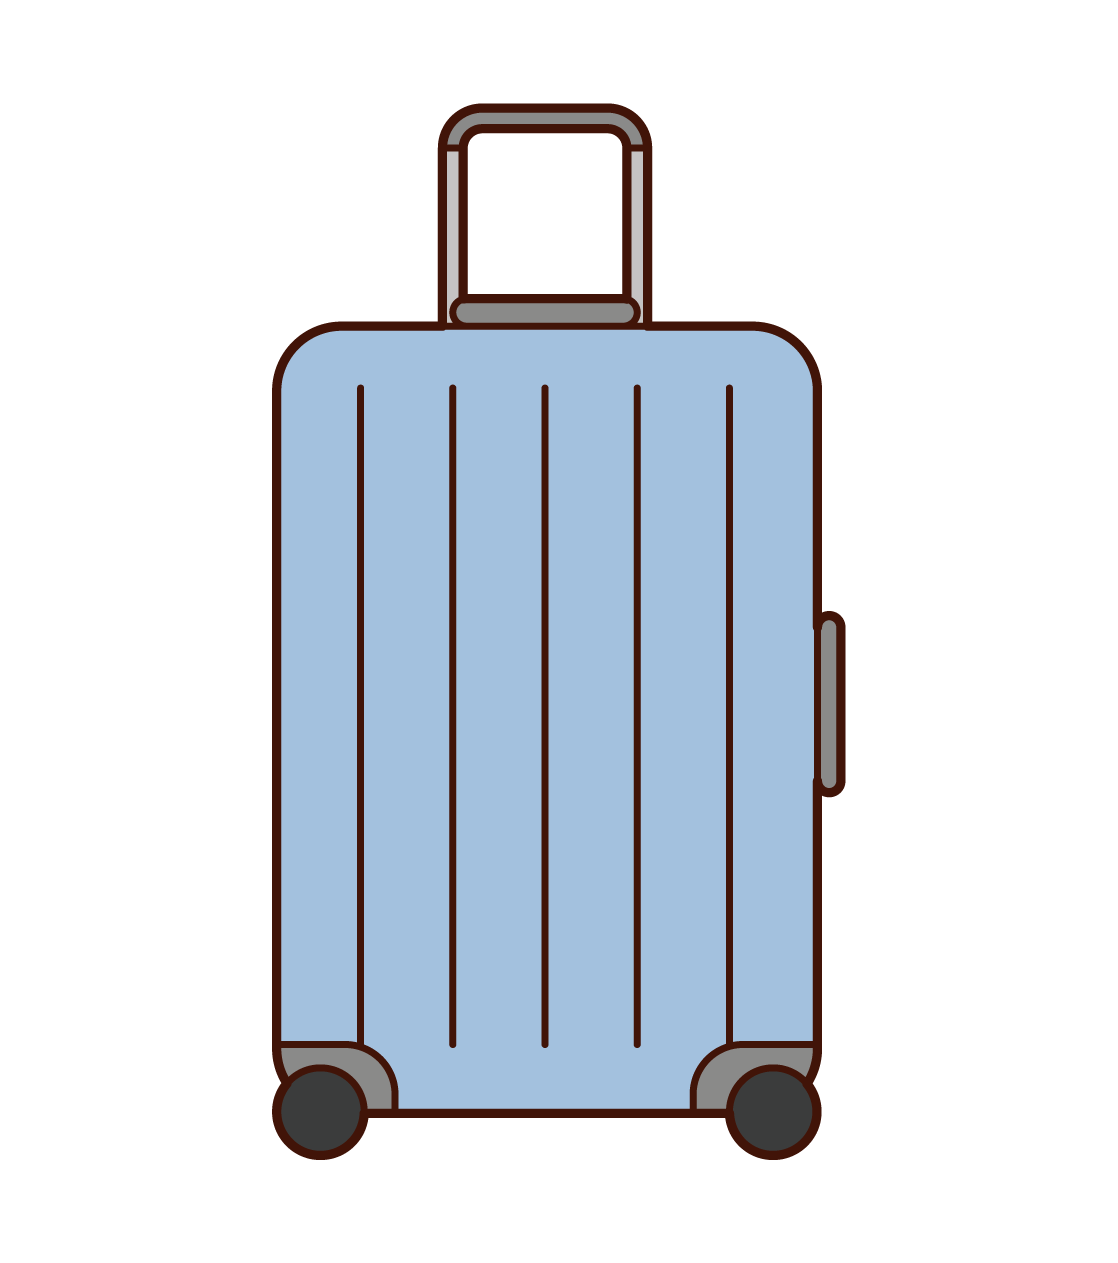 Illustration of suitcase and carry case